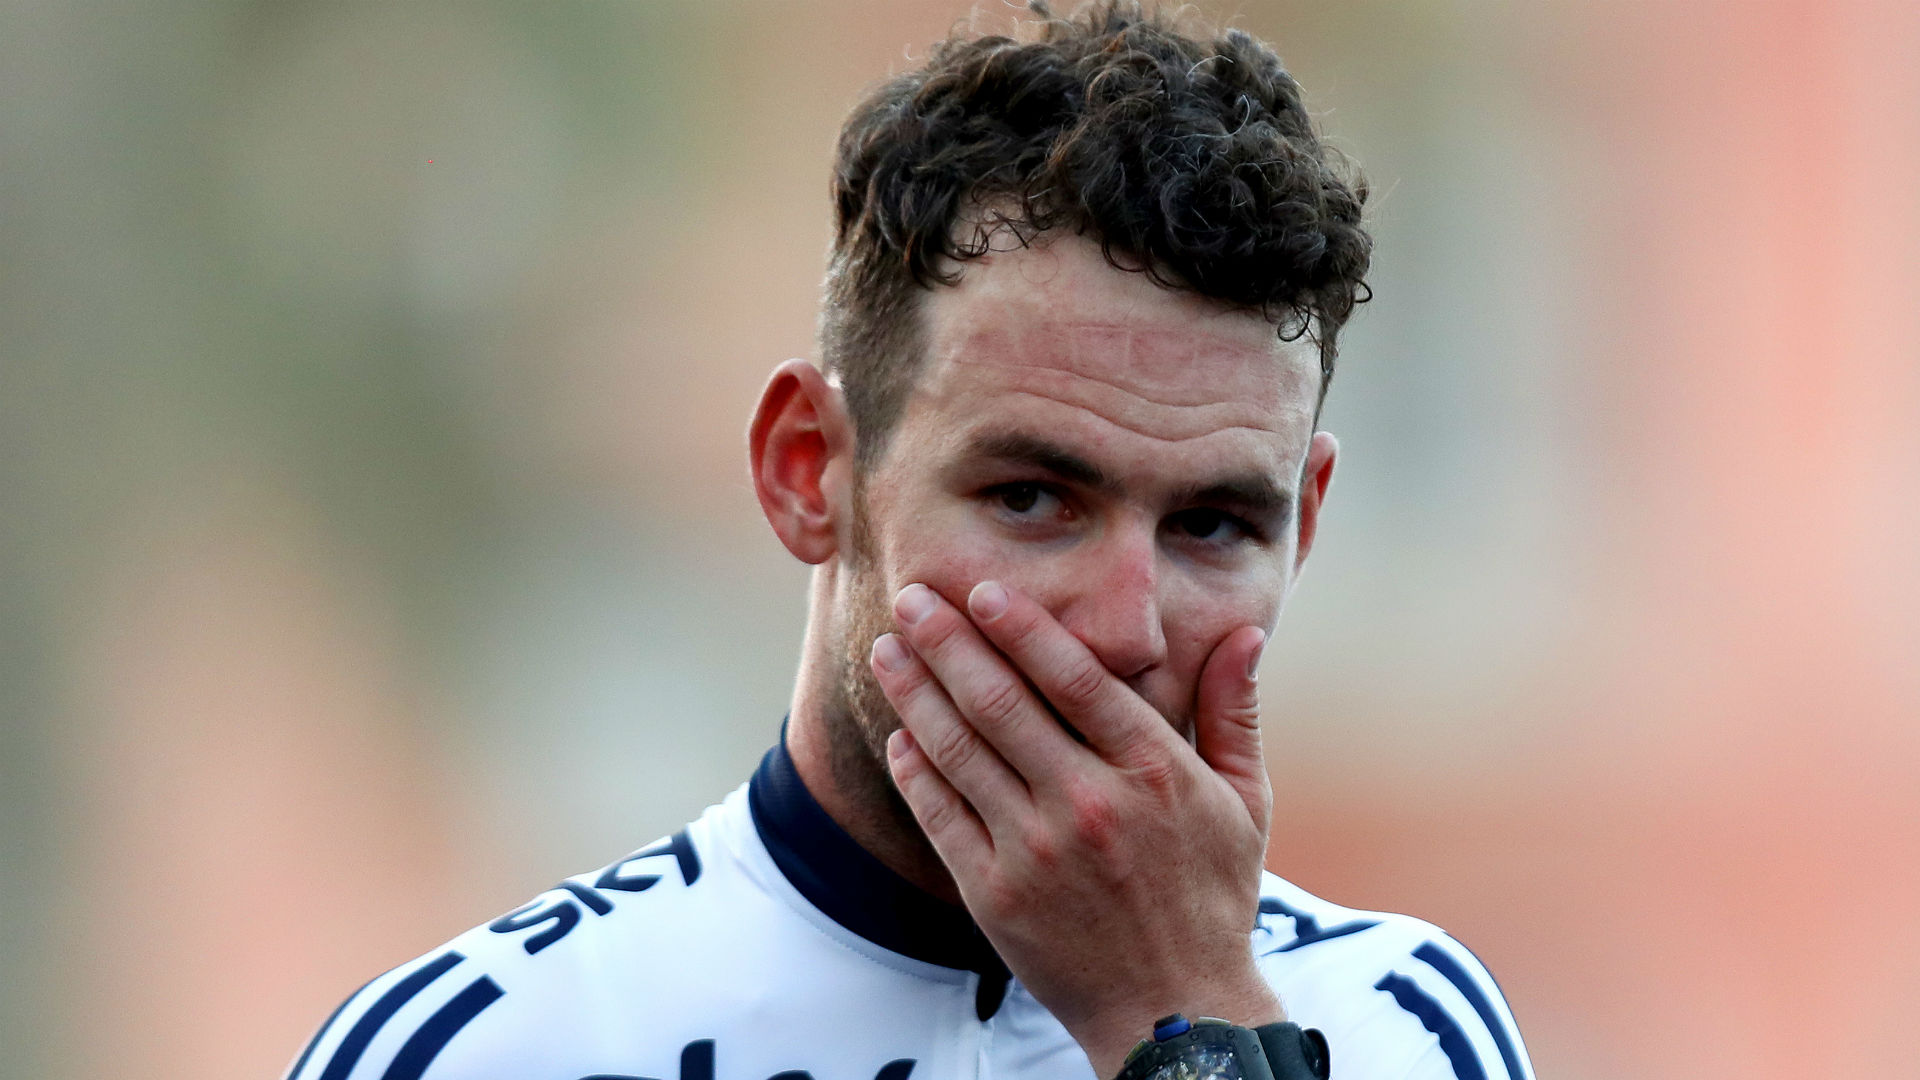 It has been a difficult start to 2018 for Mark Cavendish, who suffered another crash on the opening day of the Tirreno-Adriatico.